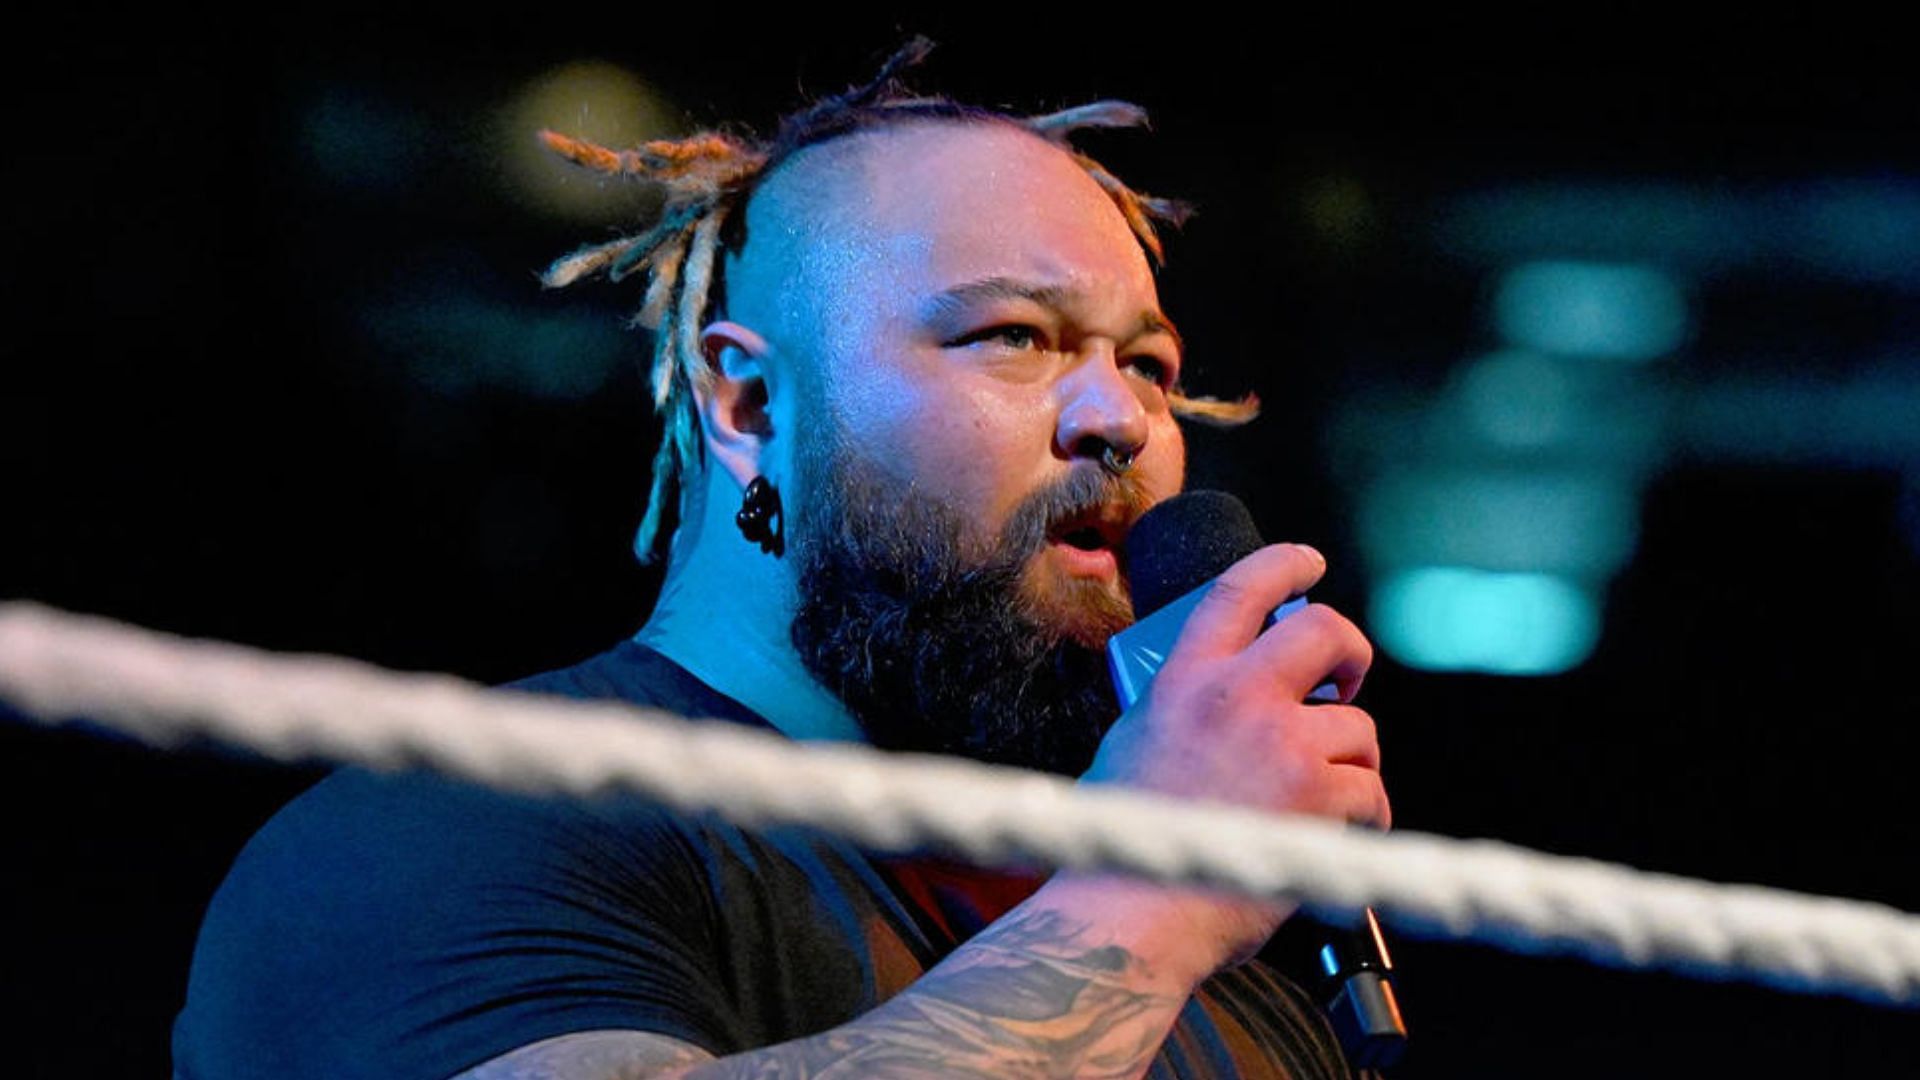 Bray Wyatt is a one-time WWE Champion and two-time Universal Champion